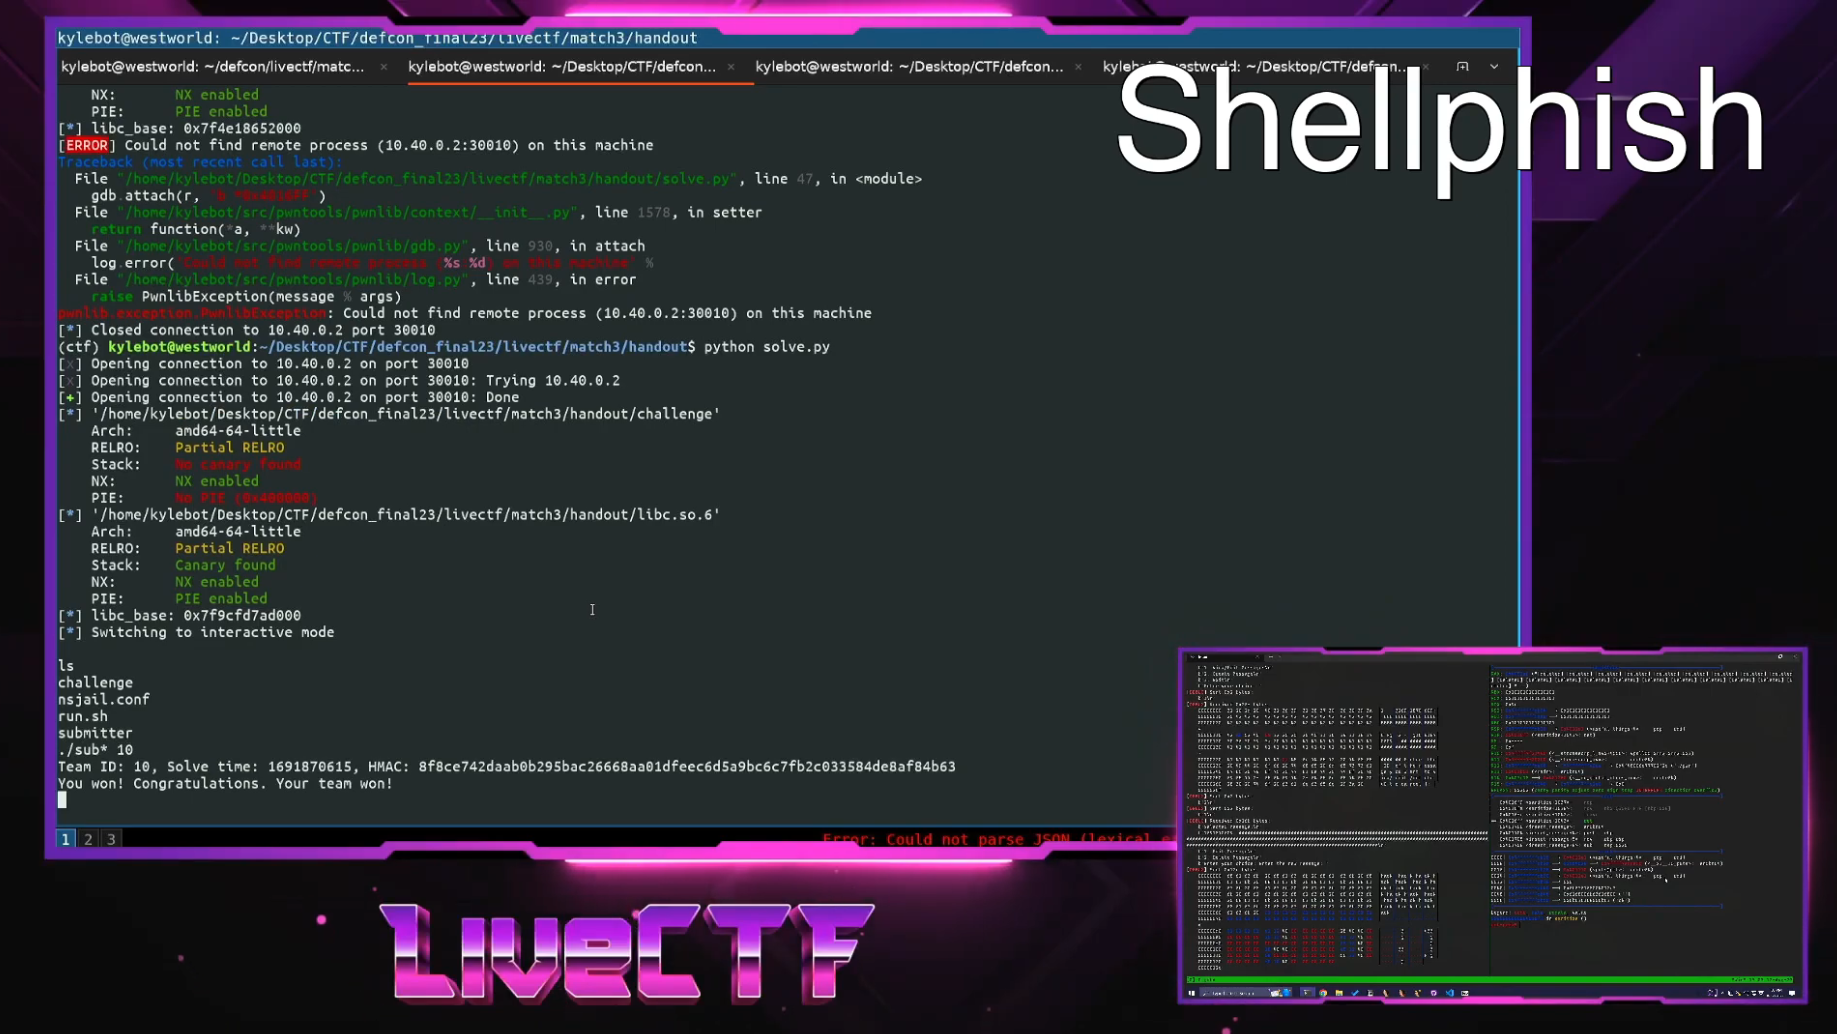 Screenshot from the commentated steam of Shellphish winning the pastez challenge